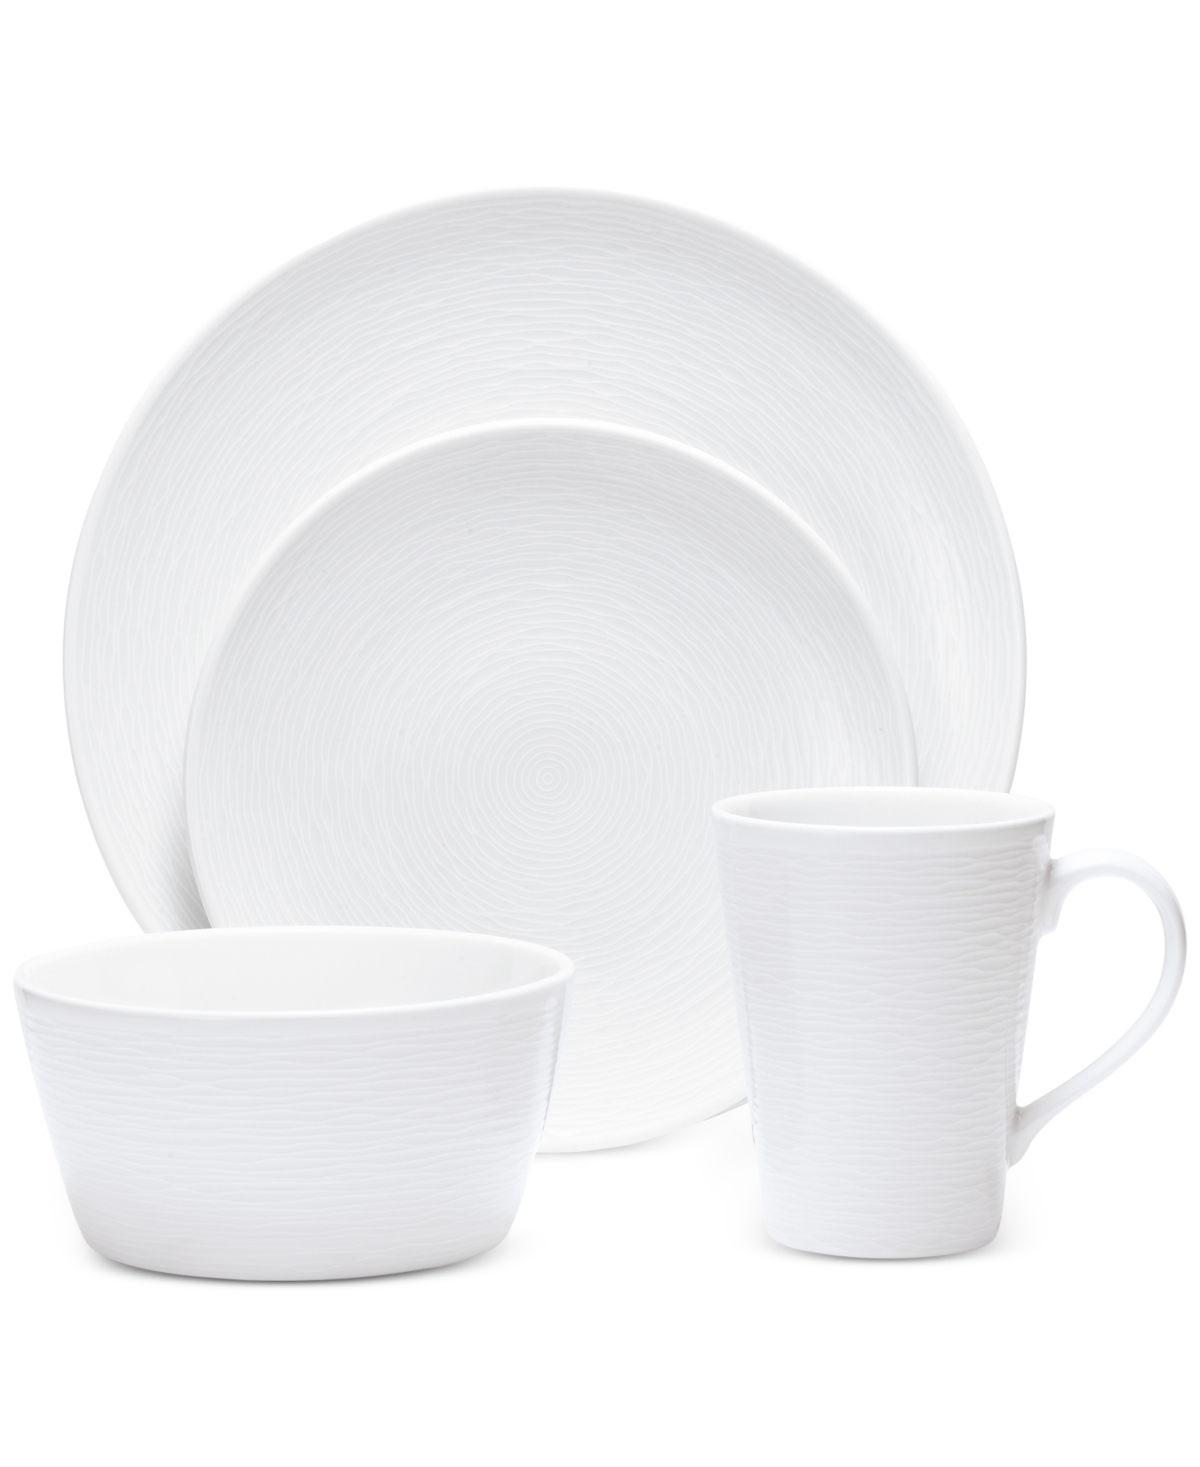 Swirl 4-Pc. Coupe Place Setting - White